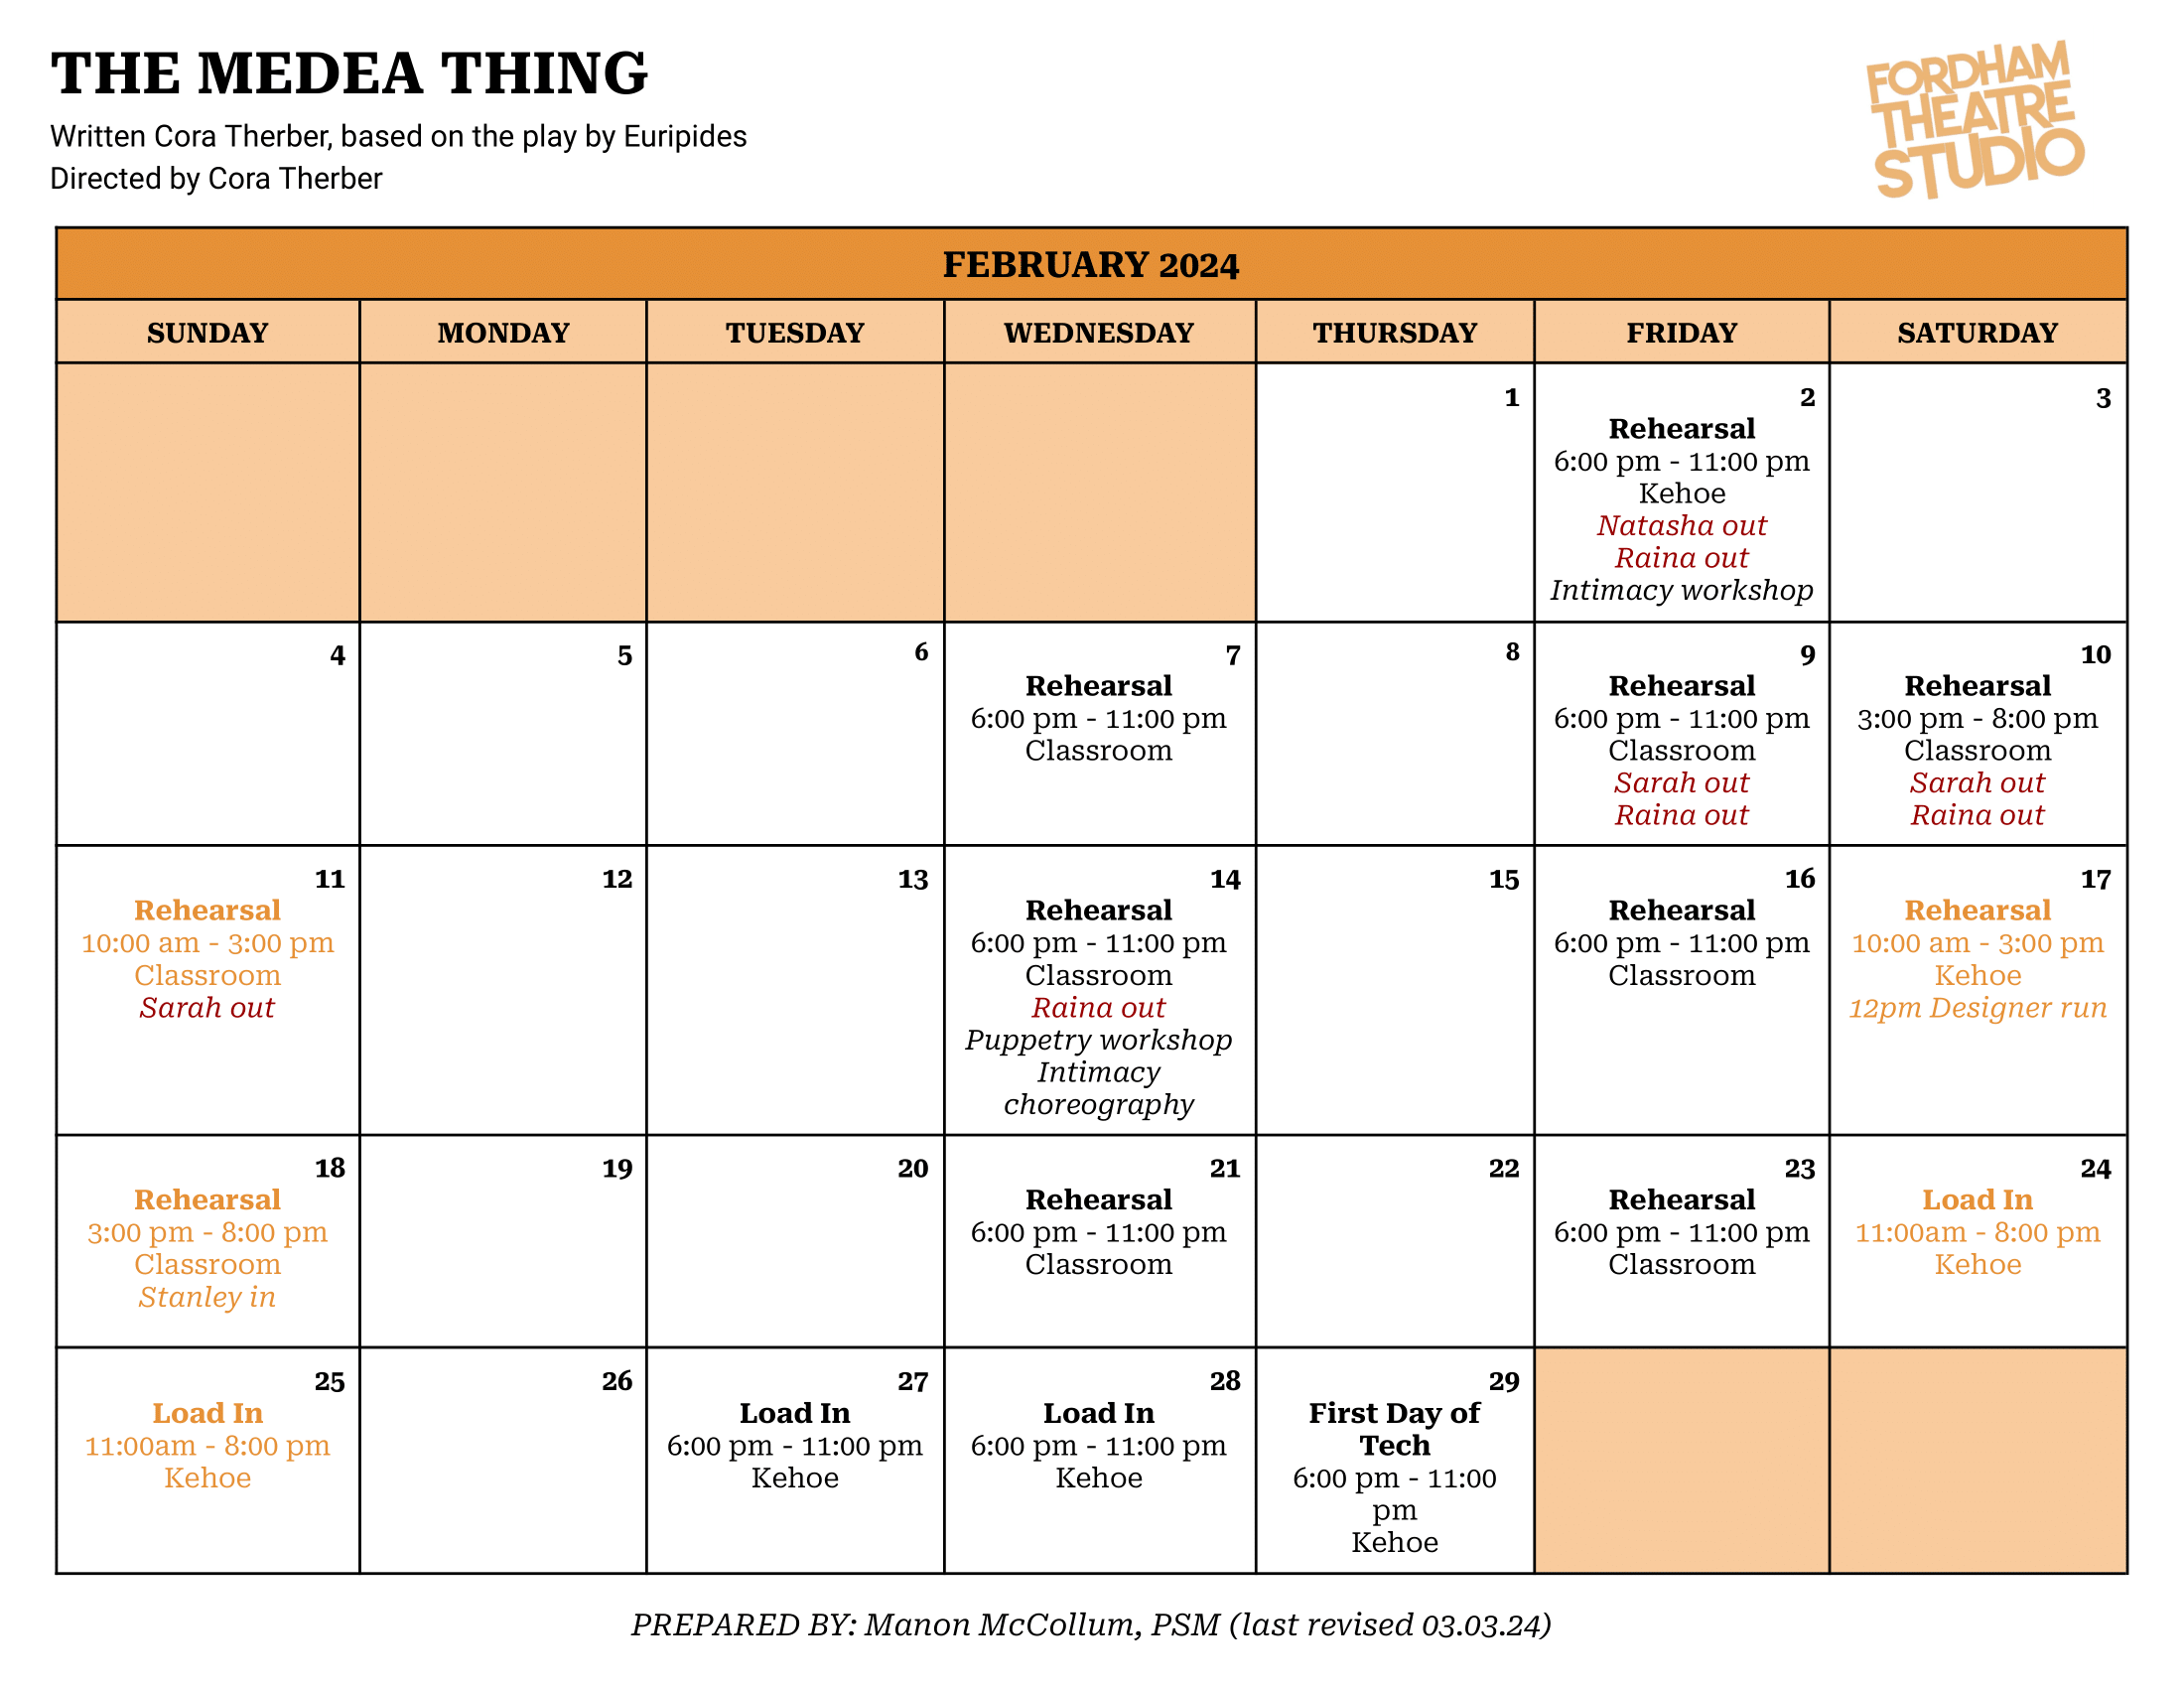 The Medea Thing Conflicts Calendar-2.png